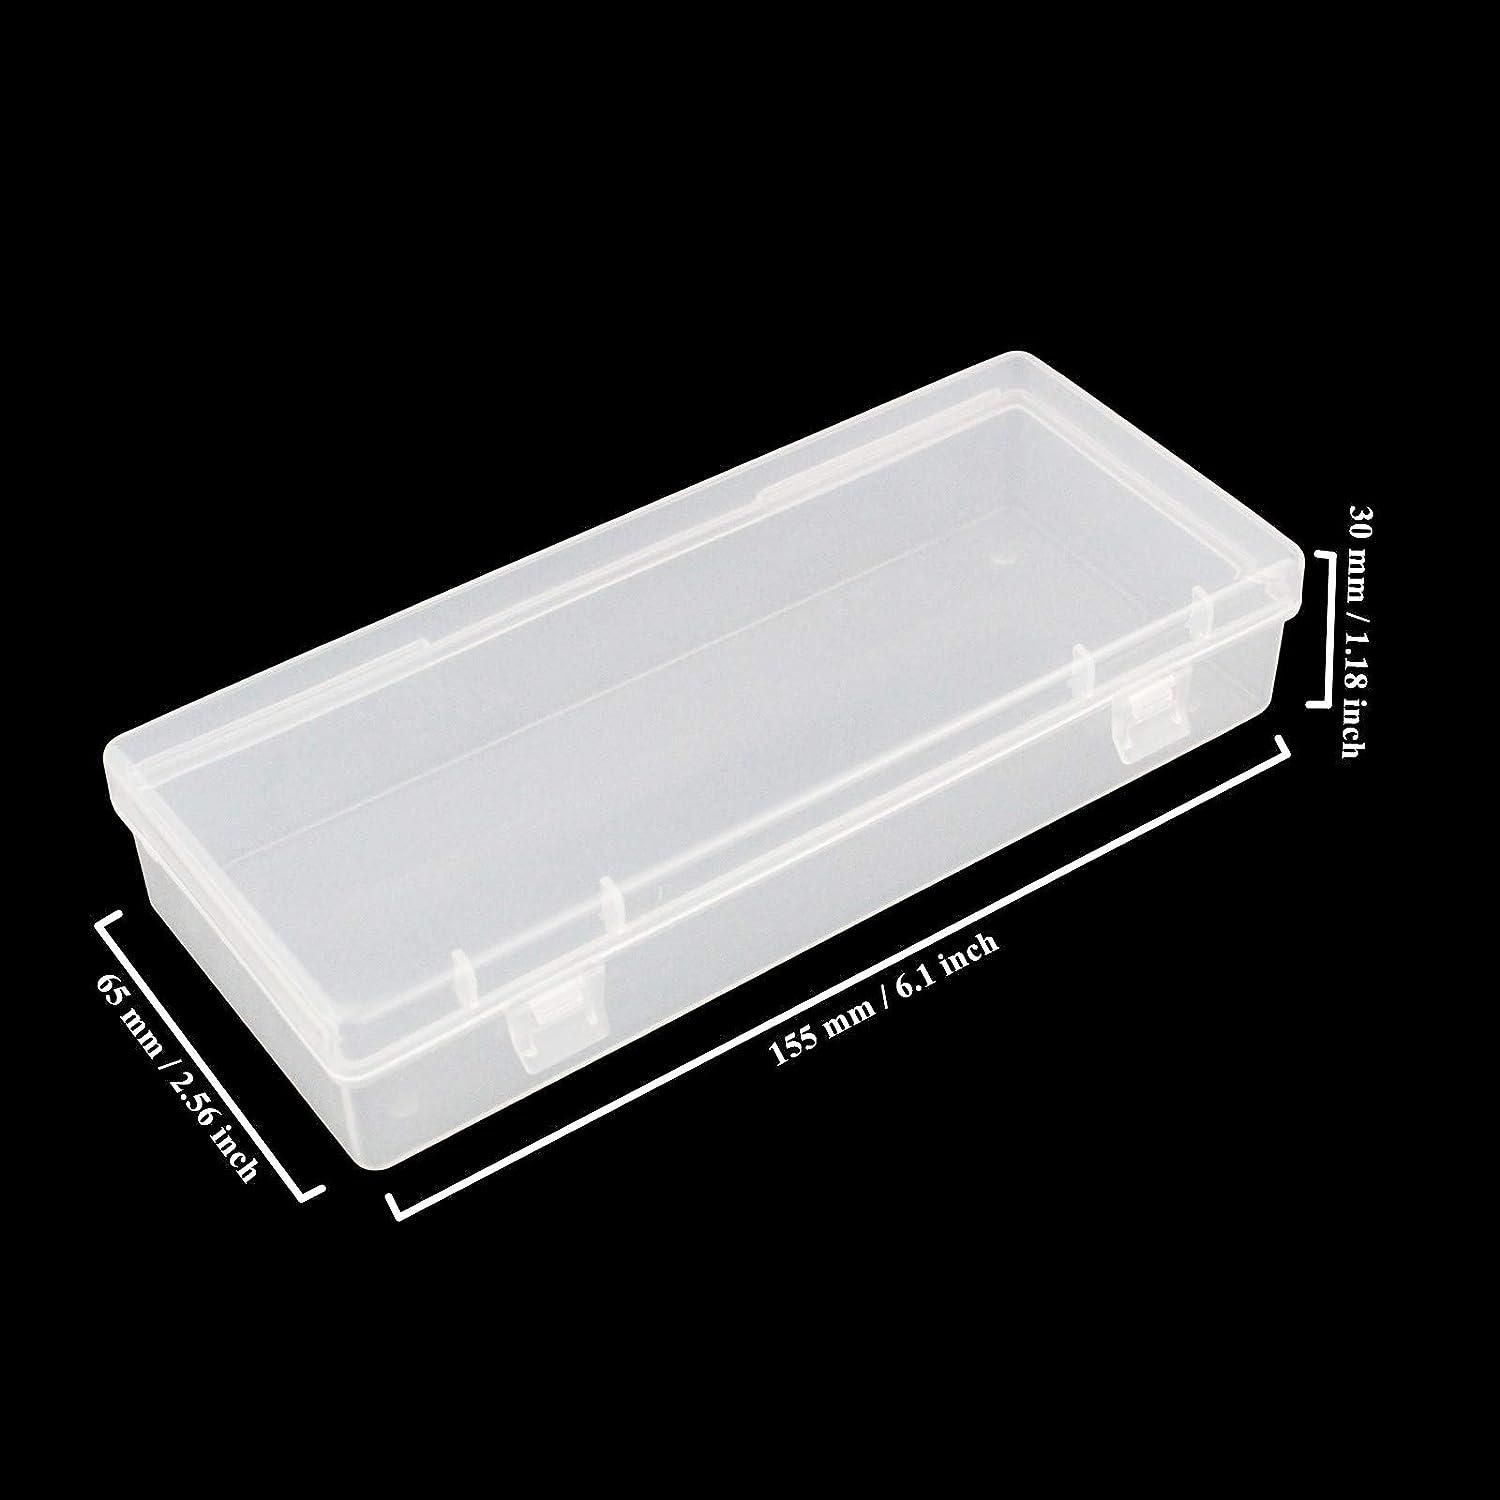 6 Pack Clear Jewelry Box Plastic Bead Storage Craft Container